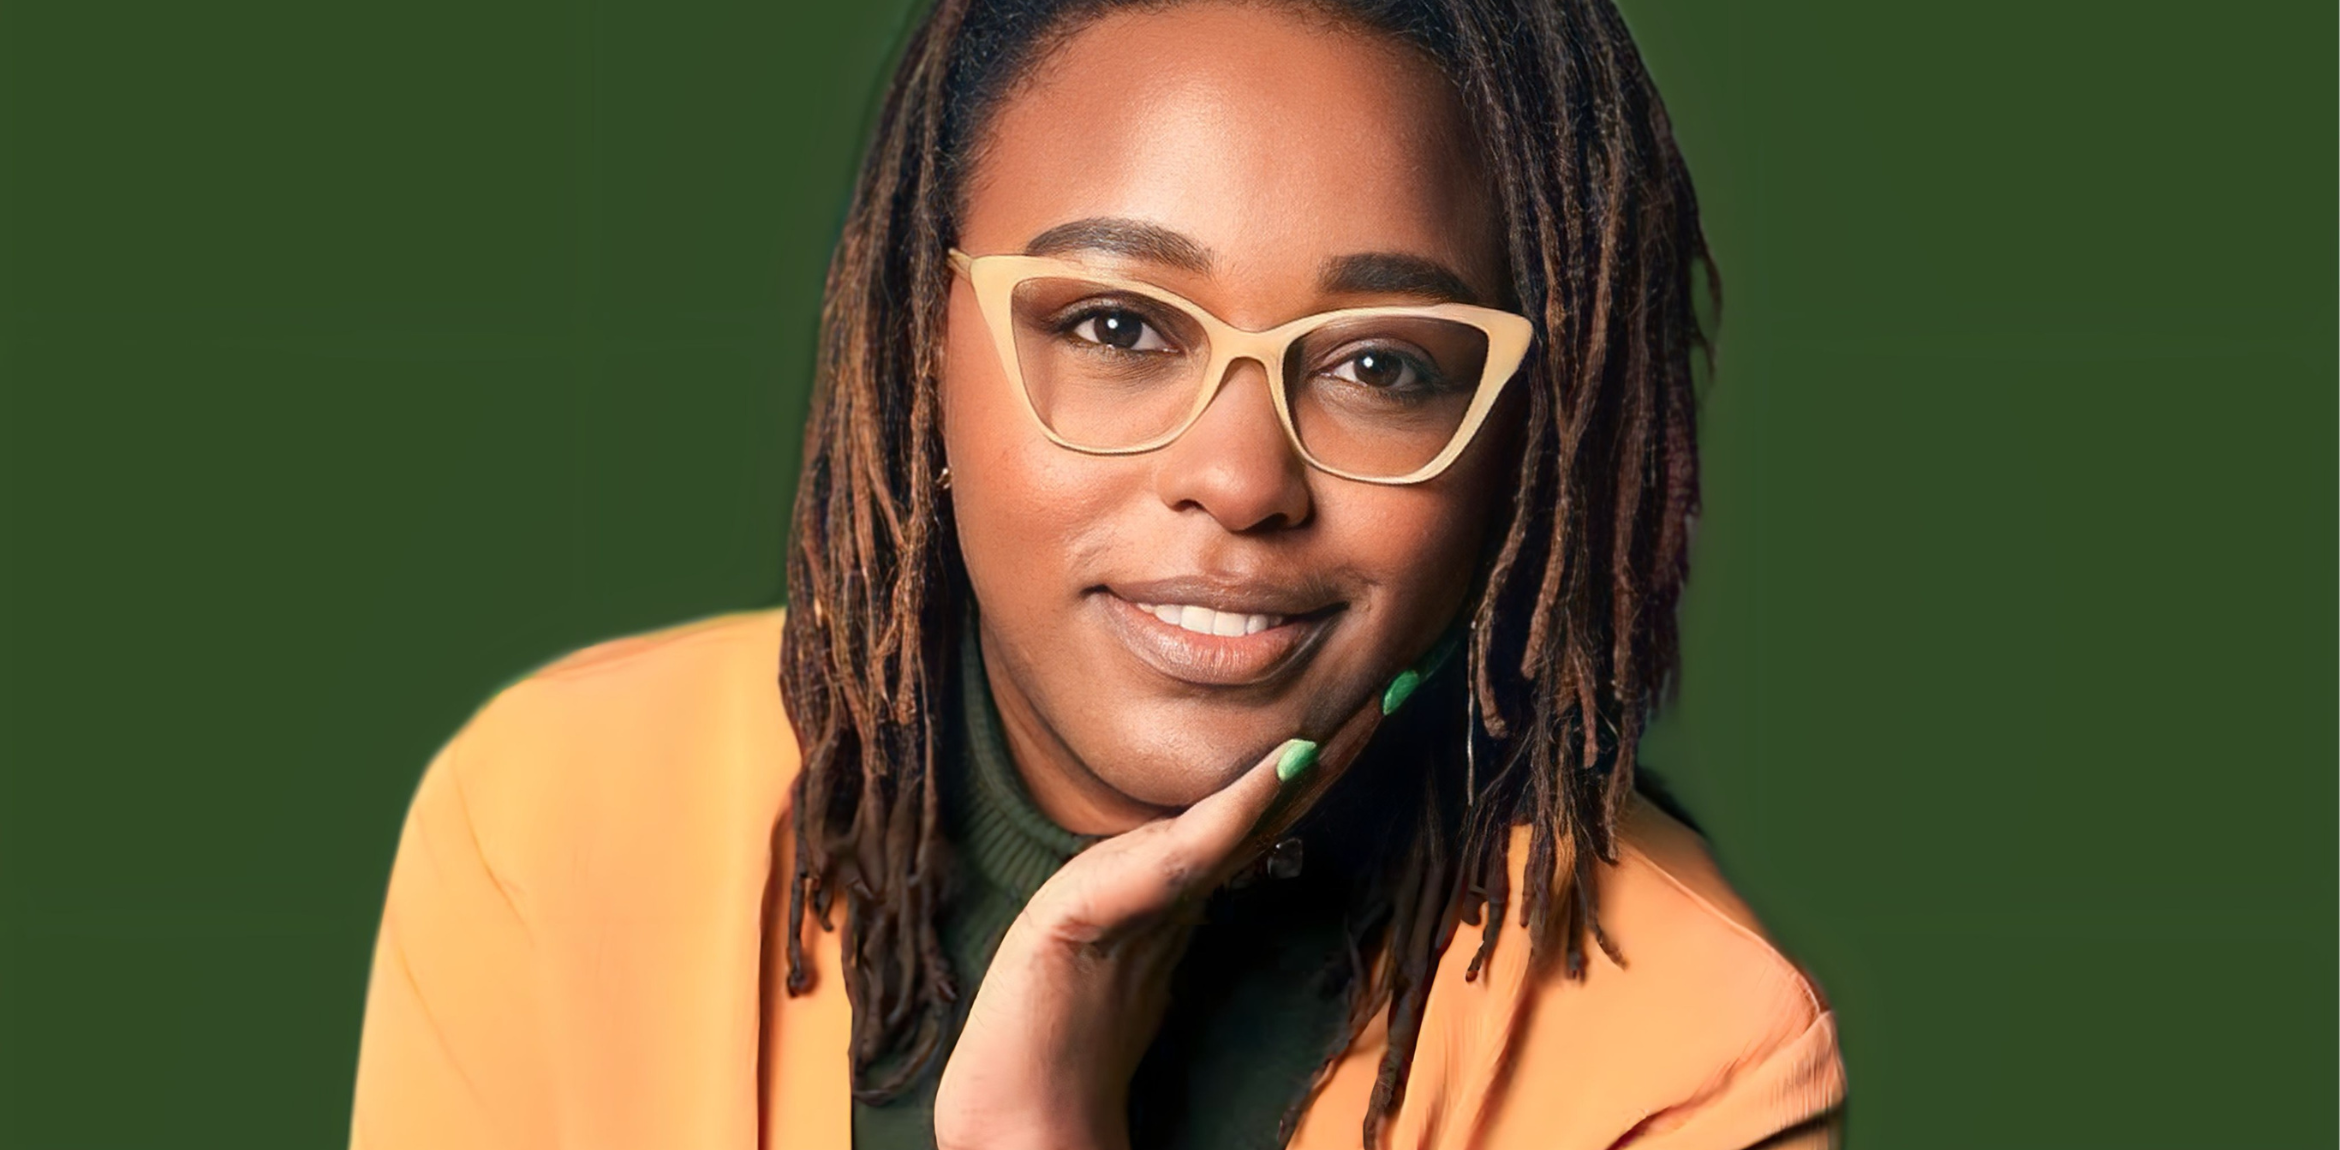 A professional woman with medium-length dreadlocks is shown in this image. She is wearing beige-framed glasses, a green top, and an orange blazer. She has a pleasant expression with a slight smile, resting her chin on her hand. The background is a solid green color.